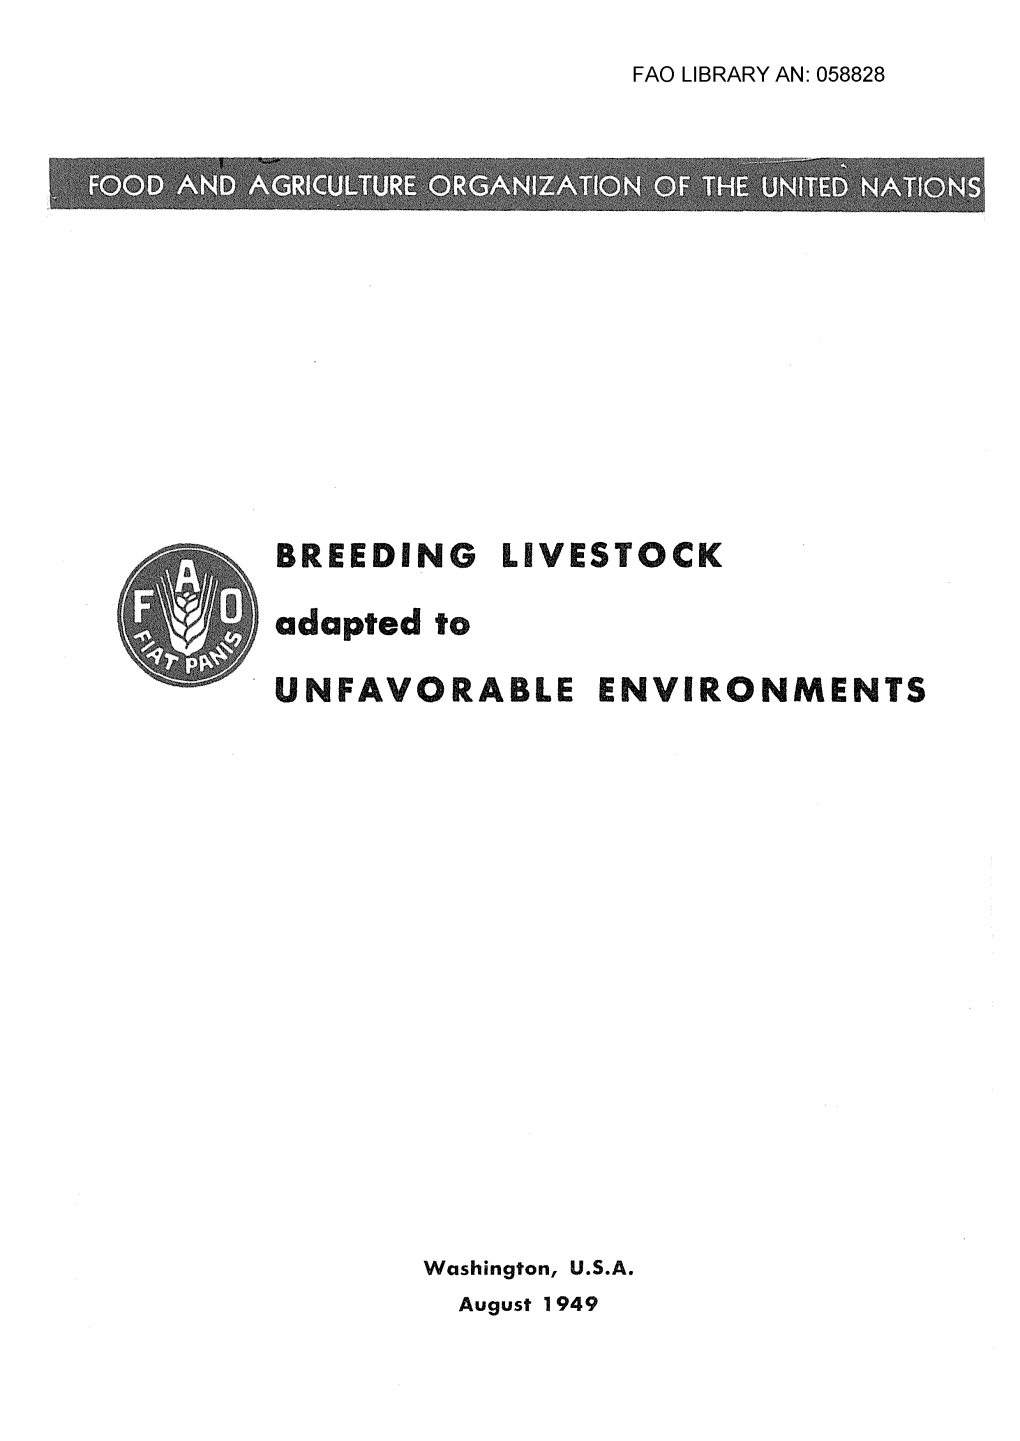 Breeding Livestock Adapted to Unfavorable Environments